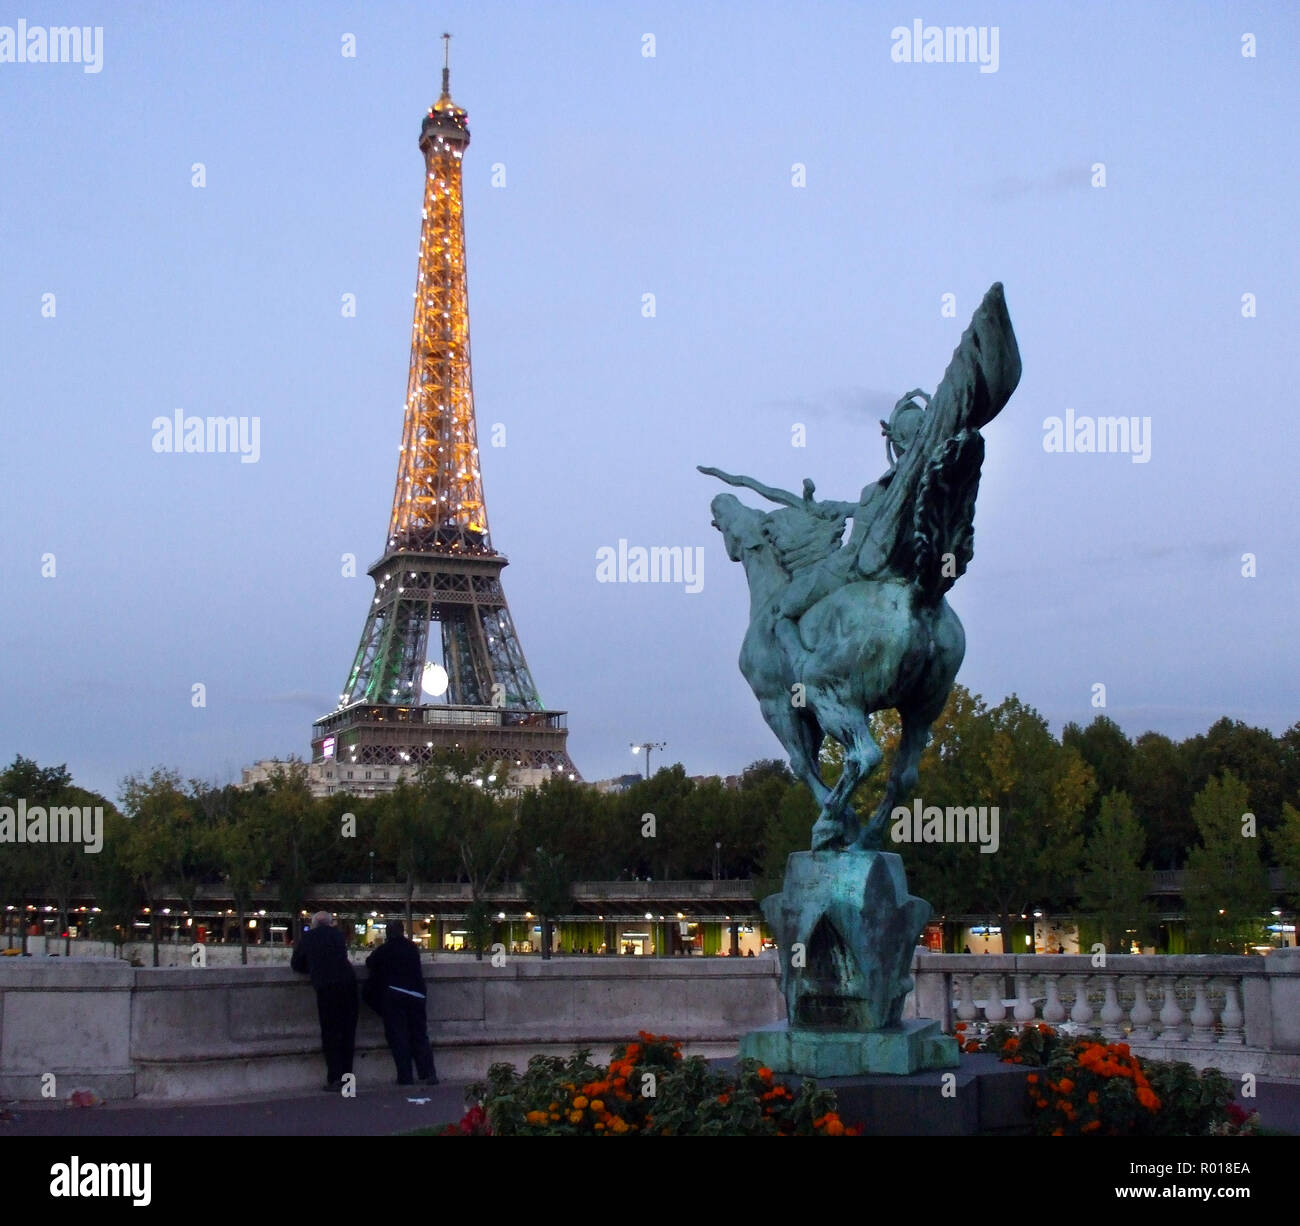 The Eiffel tower, lit up as dusk falls, as seen from a viewpoint in the  Trocadero Gardens which sit opposite the tower in Paris, France Stock Photo  - Alamy